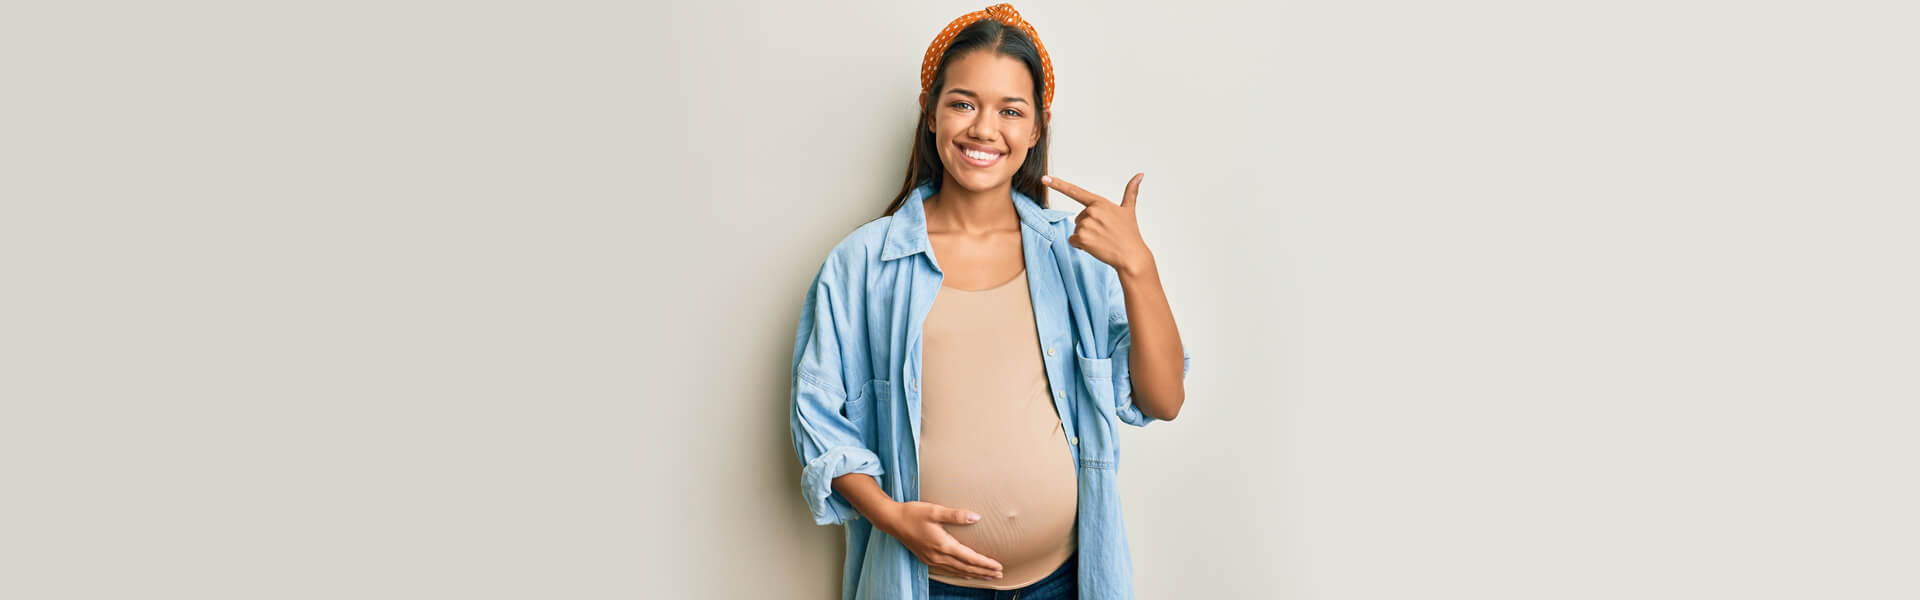 Significant Practices and Dental Habits During Pregnancy